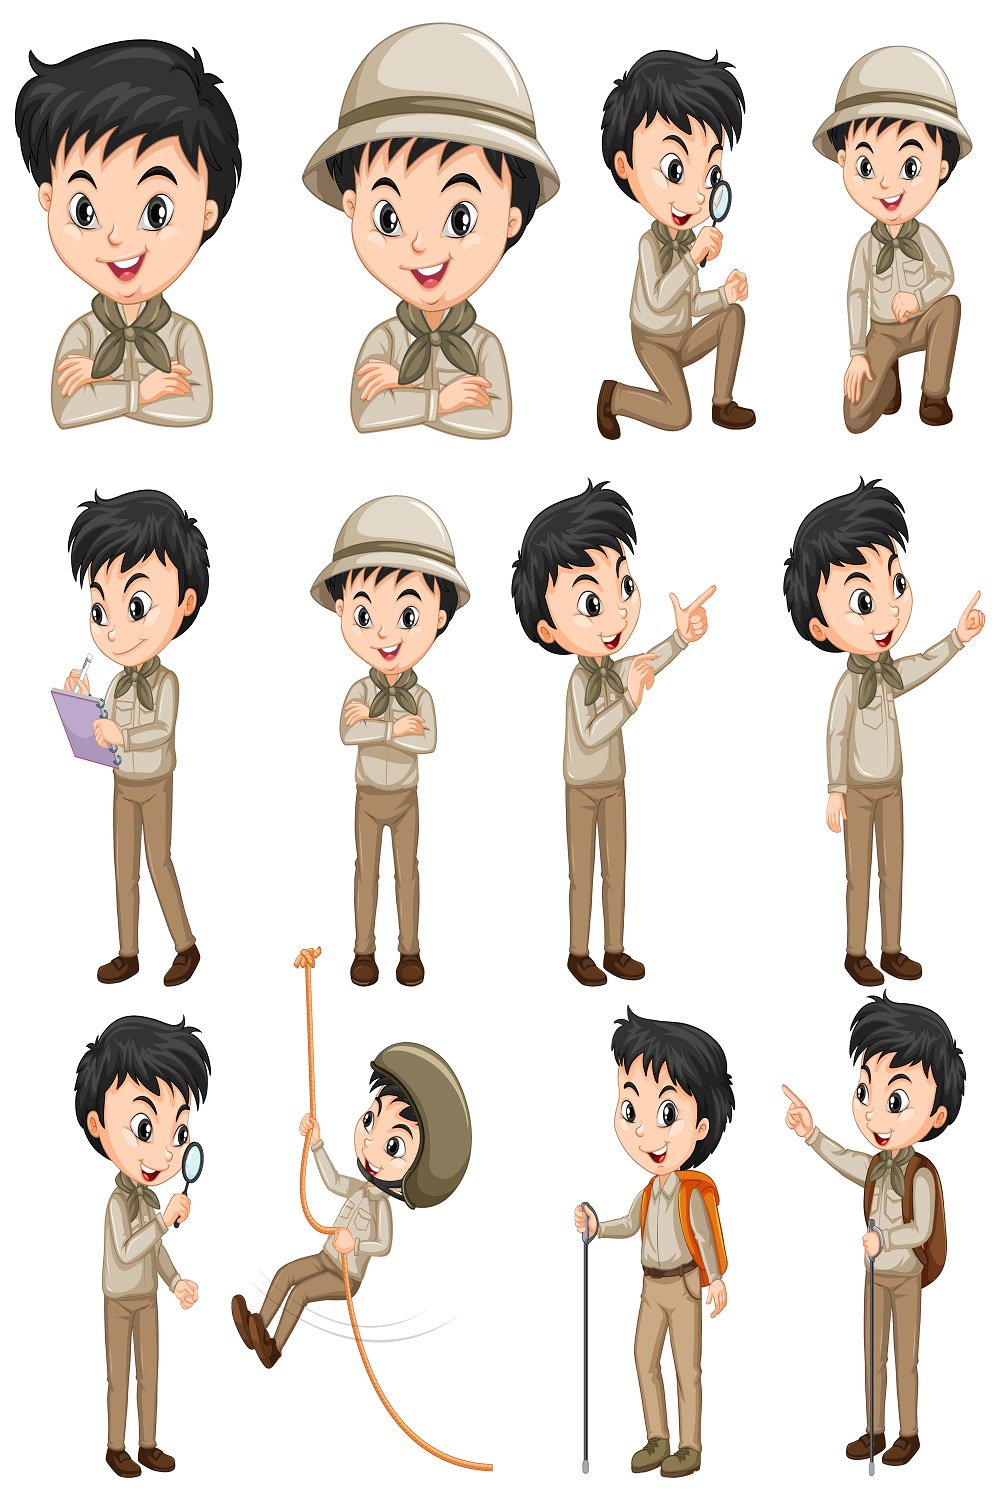 Boy safari outfit doing different activities pinterest preview image.